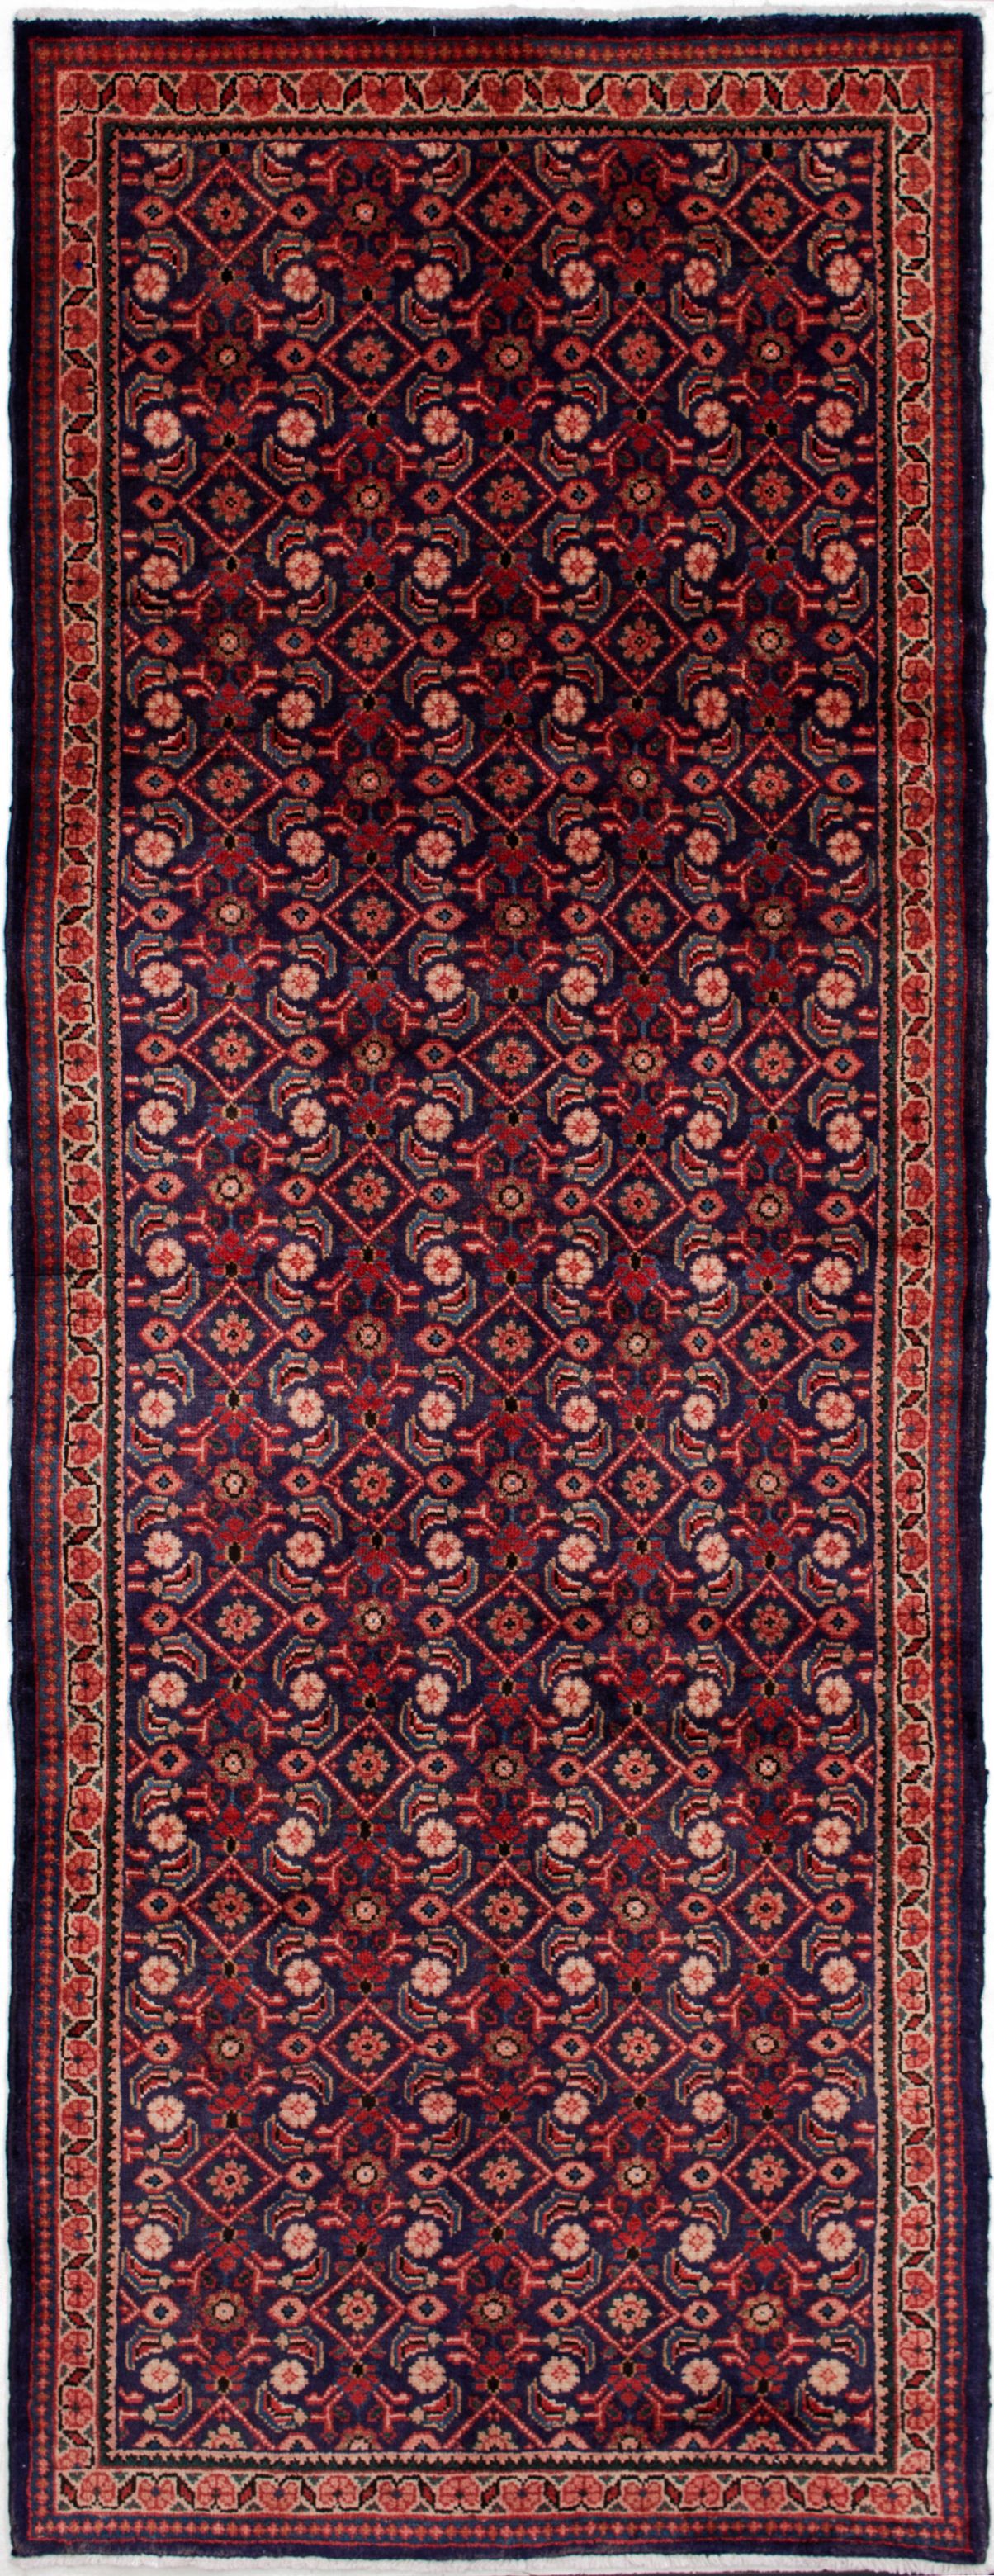 Hand-knotted Mahal Dark Navy Wool Rug 3'8" x 6'8" Size: 3'8" x 6'8"  